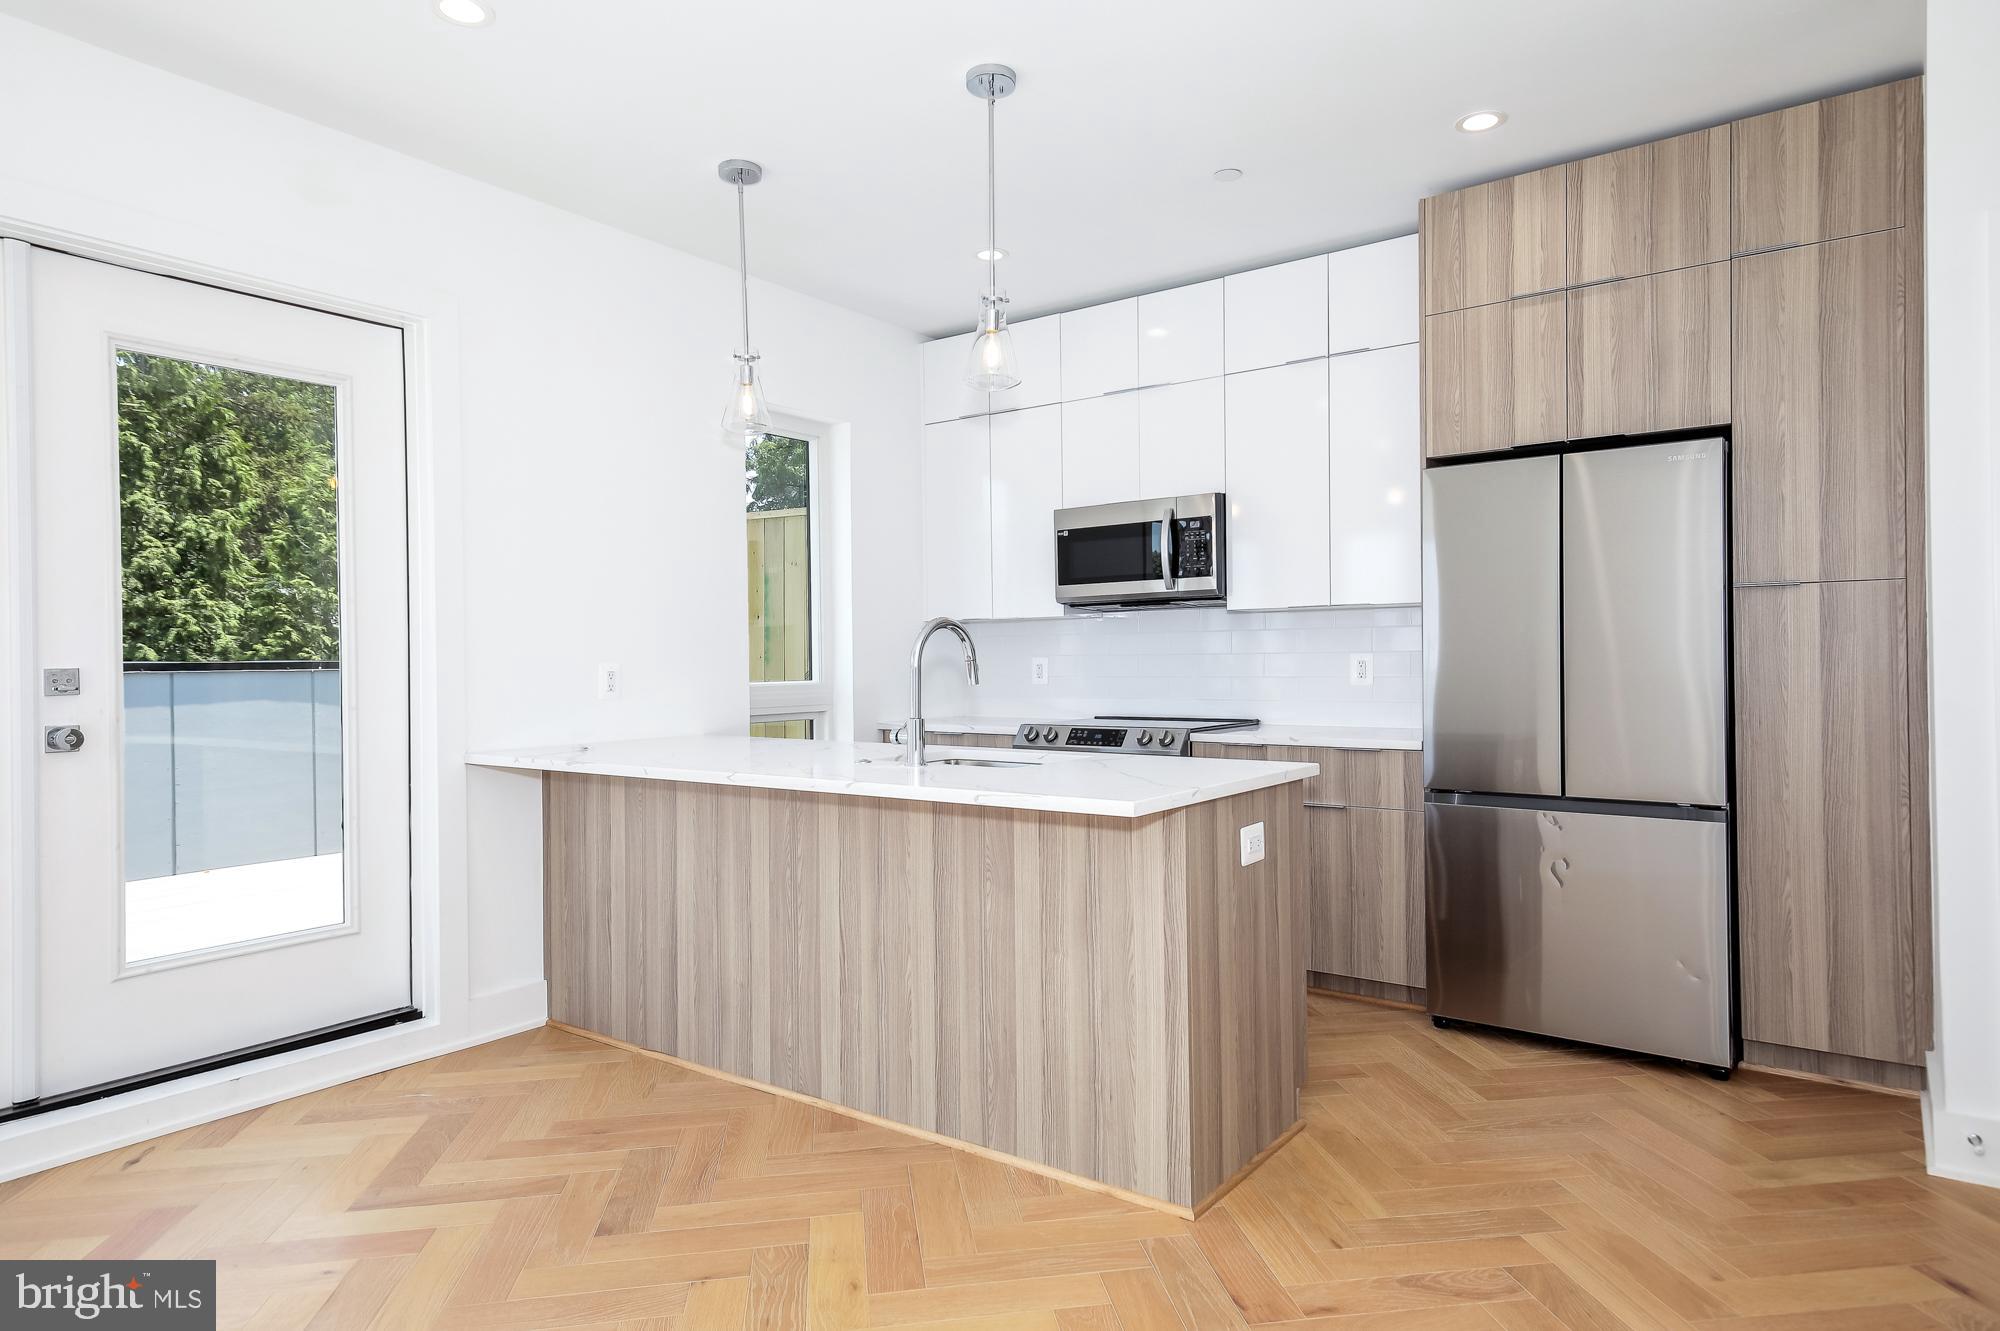 a kitchen with kitchen island a refrigerator sink and microwave